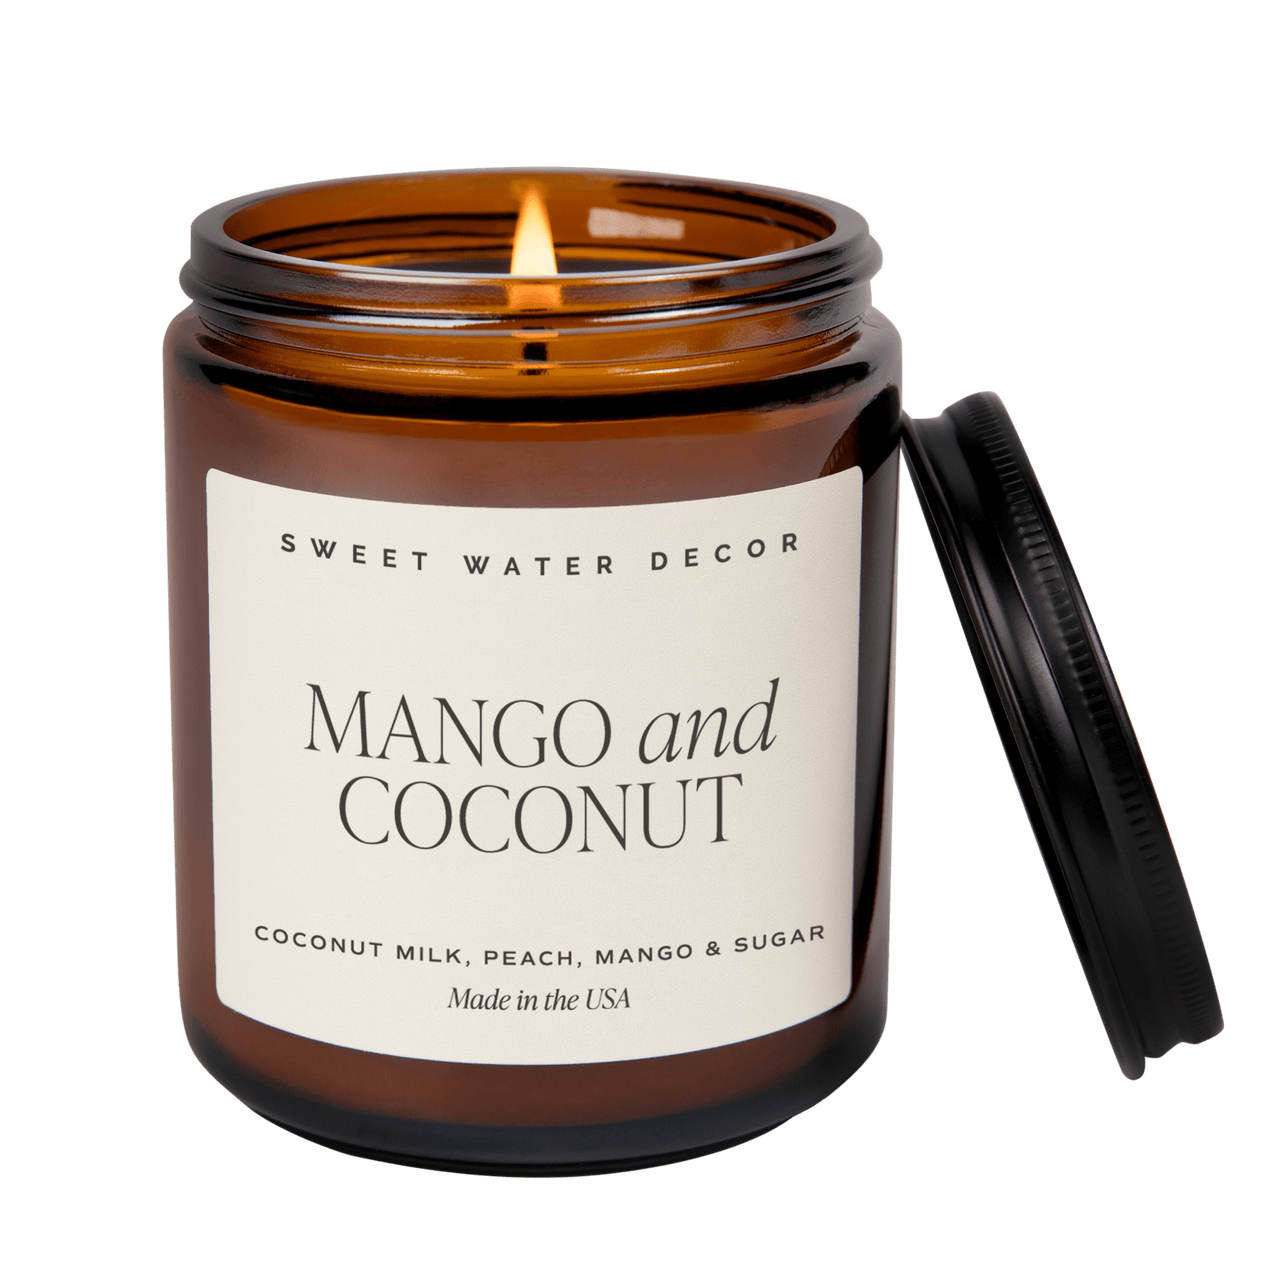 Mango and Coconut Soy Candle - Amber Jar - 9 oz - Tony's Home Furnishings